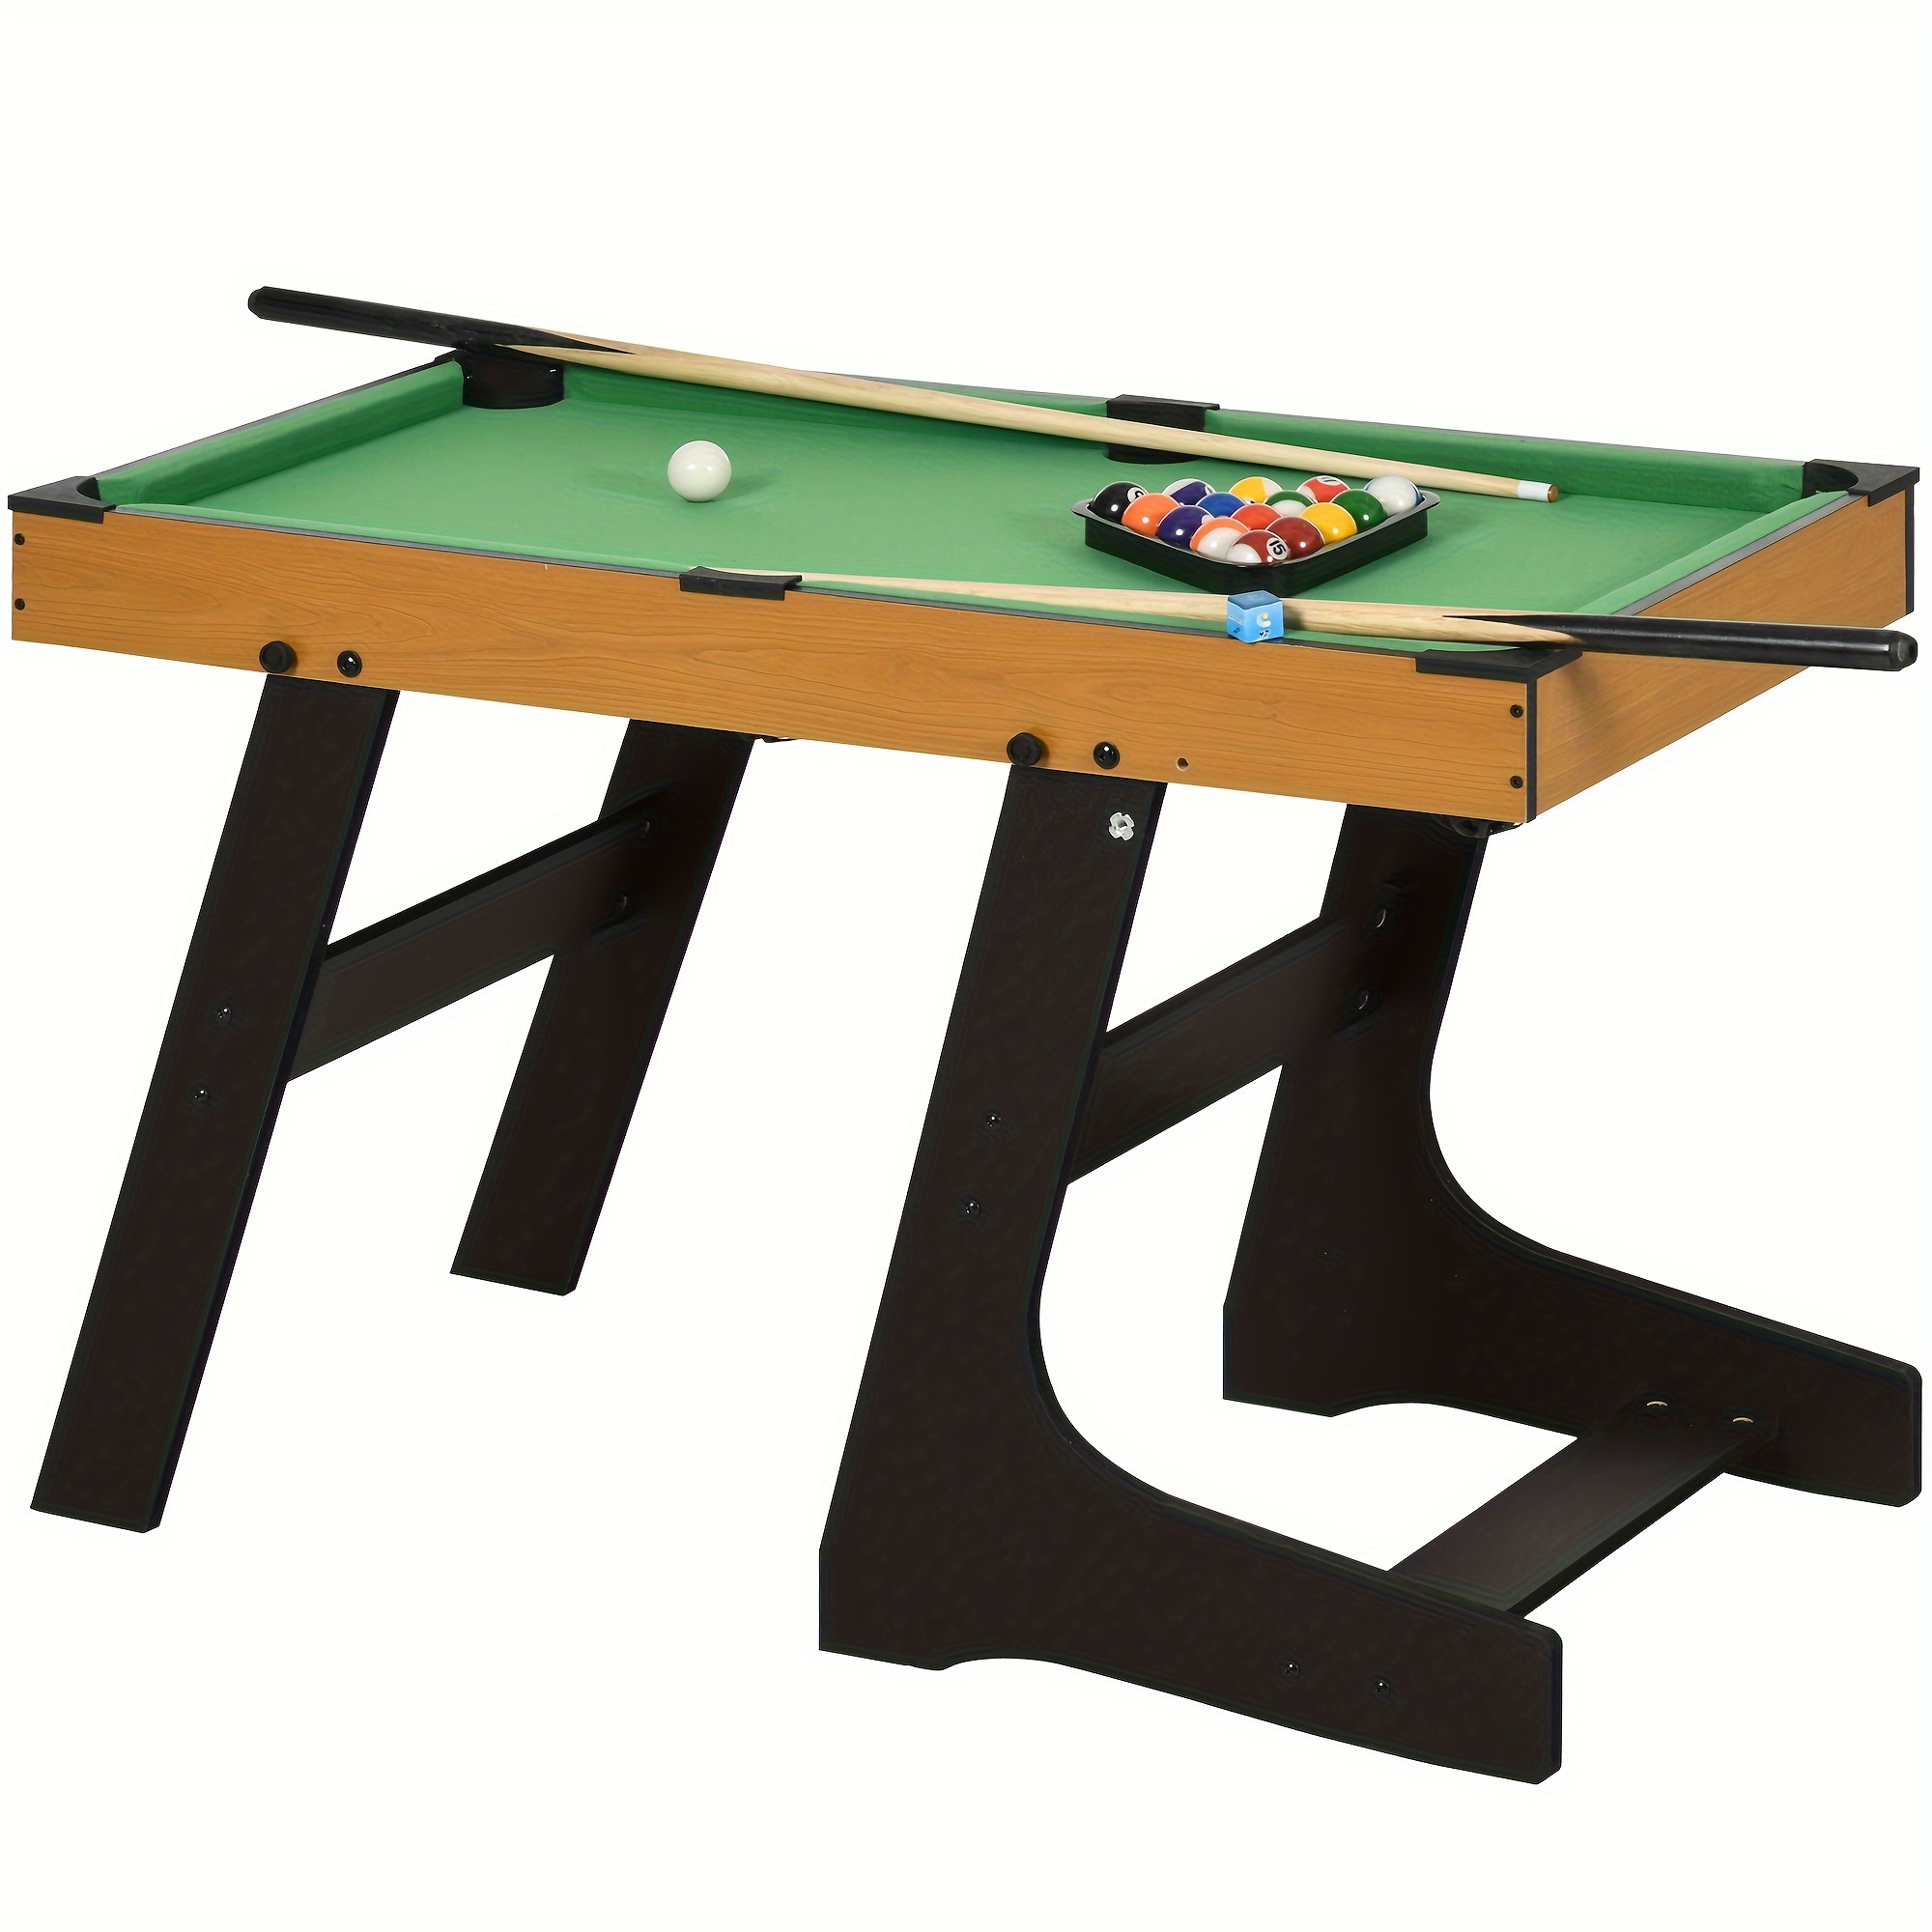 

Soozier 38" Foldable Billiards Tabletop Game, Pool Table Set, Fun For The Whole Family With Easy Folding For Storage, Balls, Cues, Chalk, Brush For Game Room, Man Cave